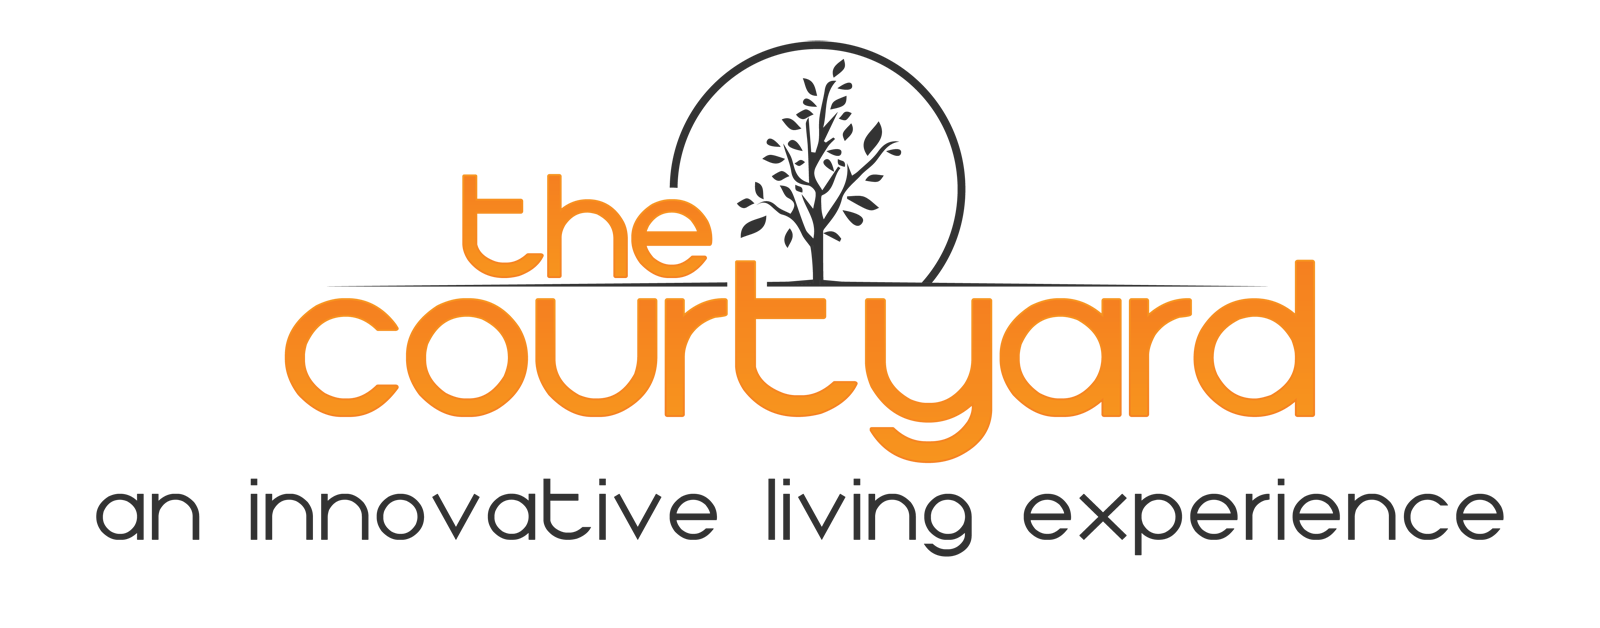 Home - The Courtyard - An Innovative Living Experience